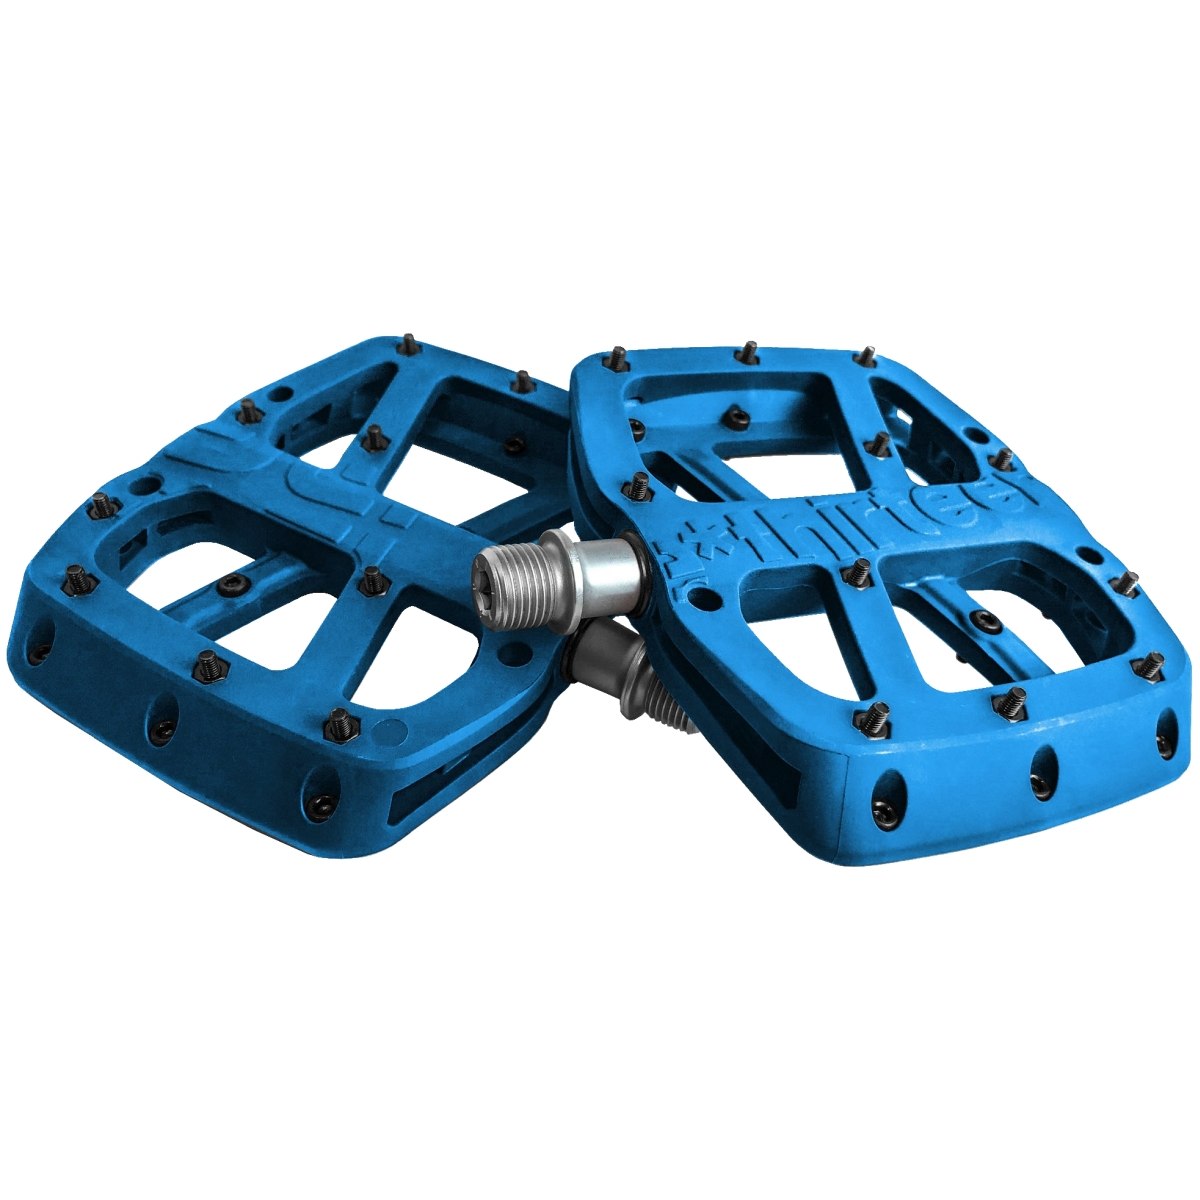 Picture of e*thirteen Base Flat Pedals - blue